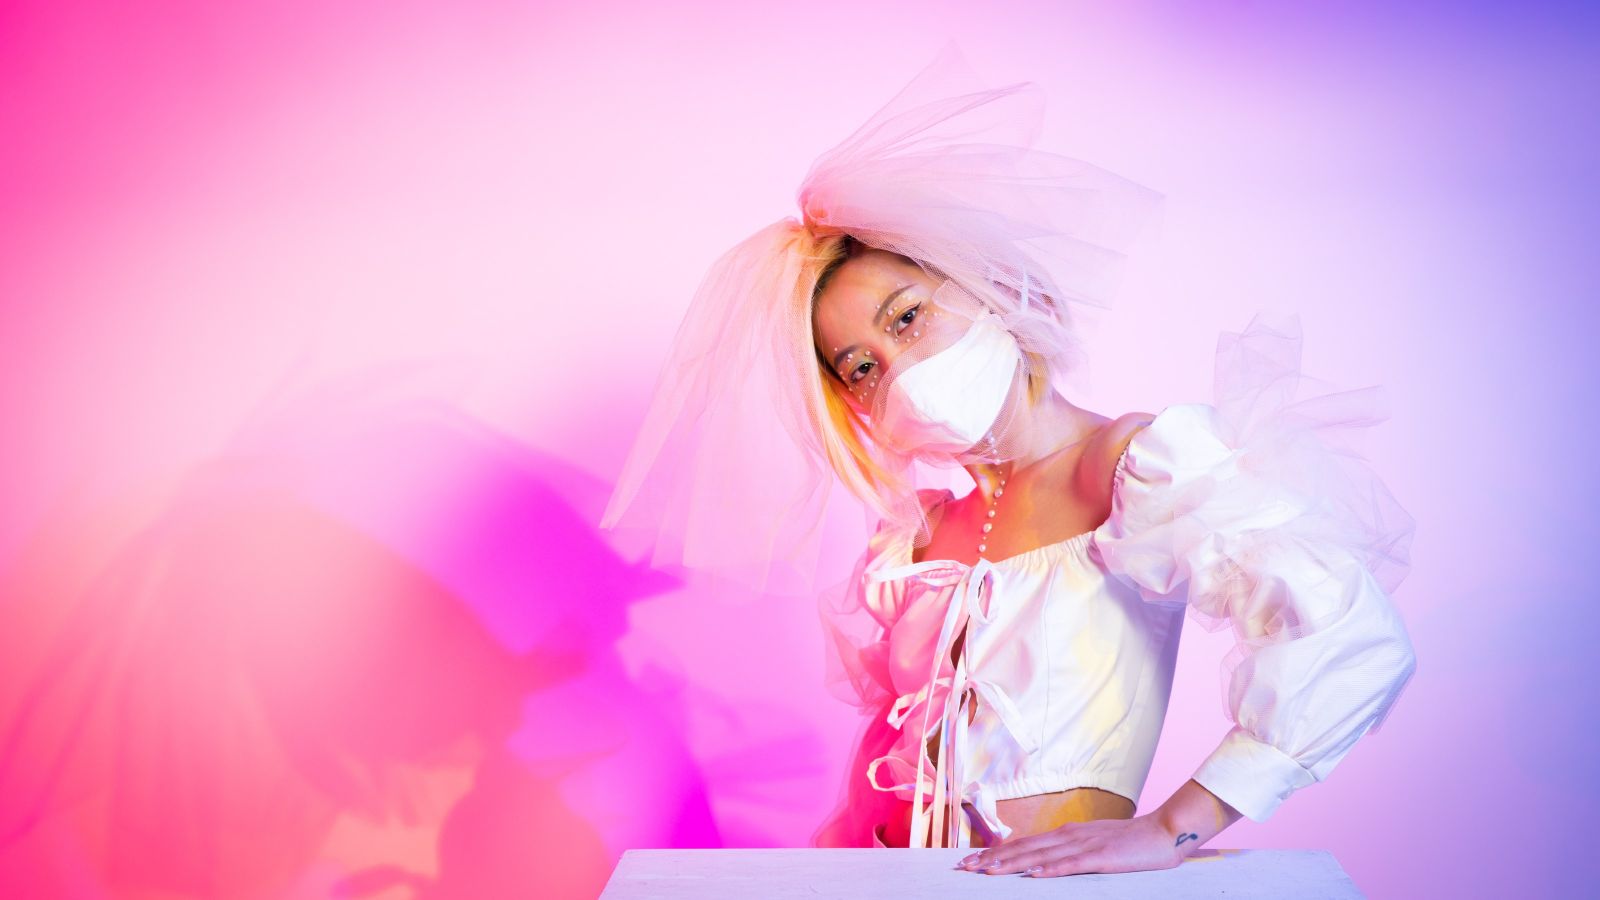 Model wearing tie front white shirt with dramatic organza headpiece in front of pink background